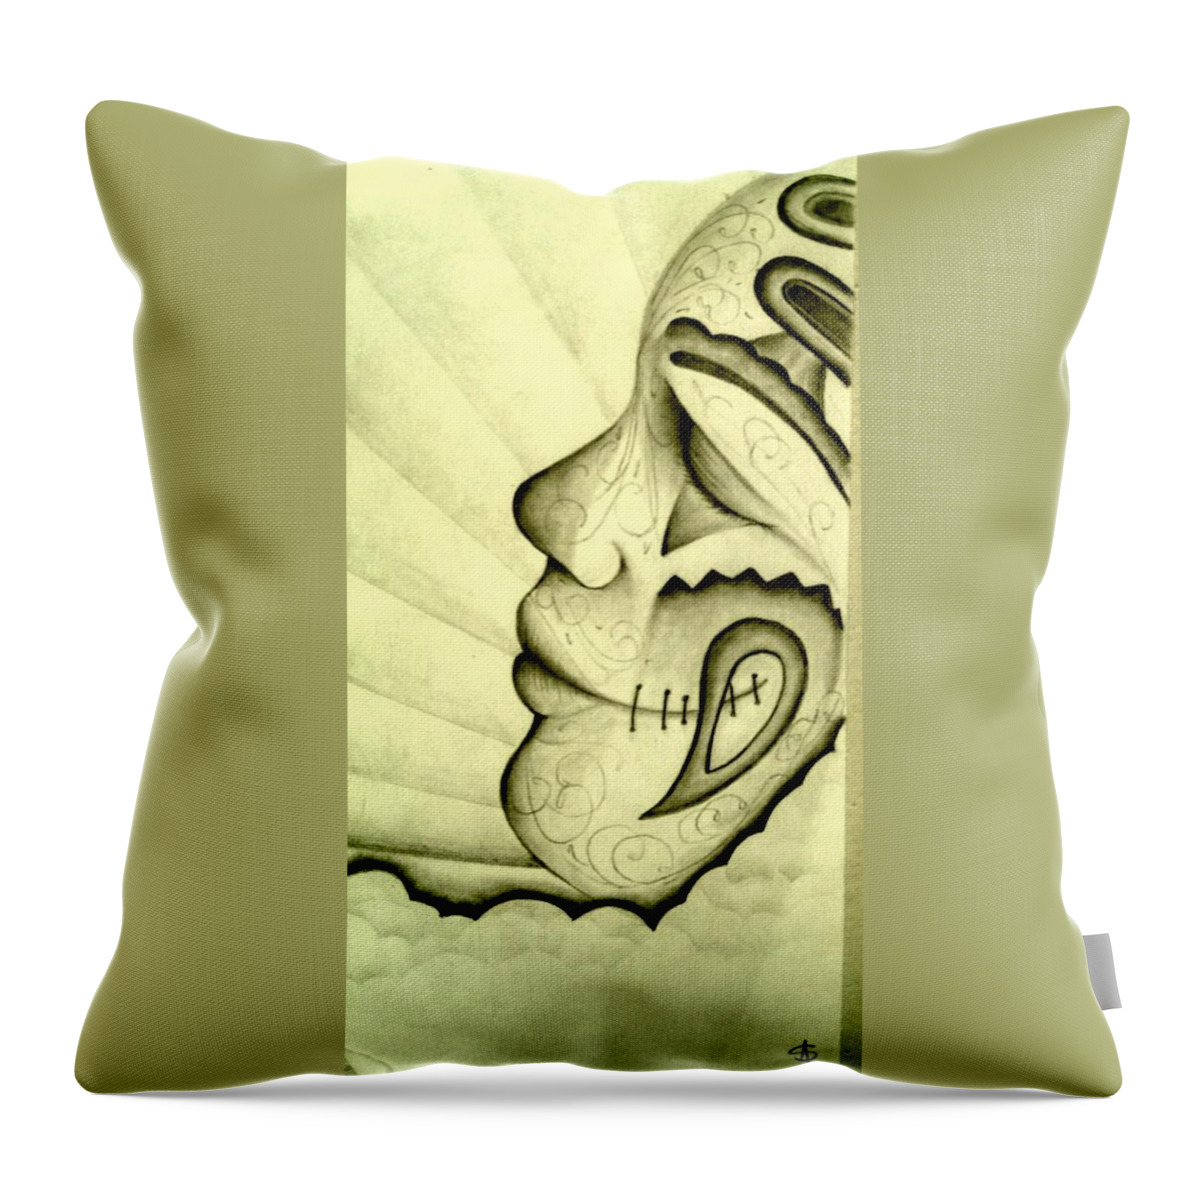 Black Art Throw Pillow featuring the drawing Untitled 11 by A S 